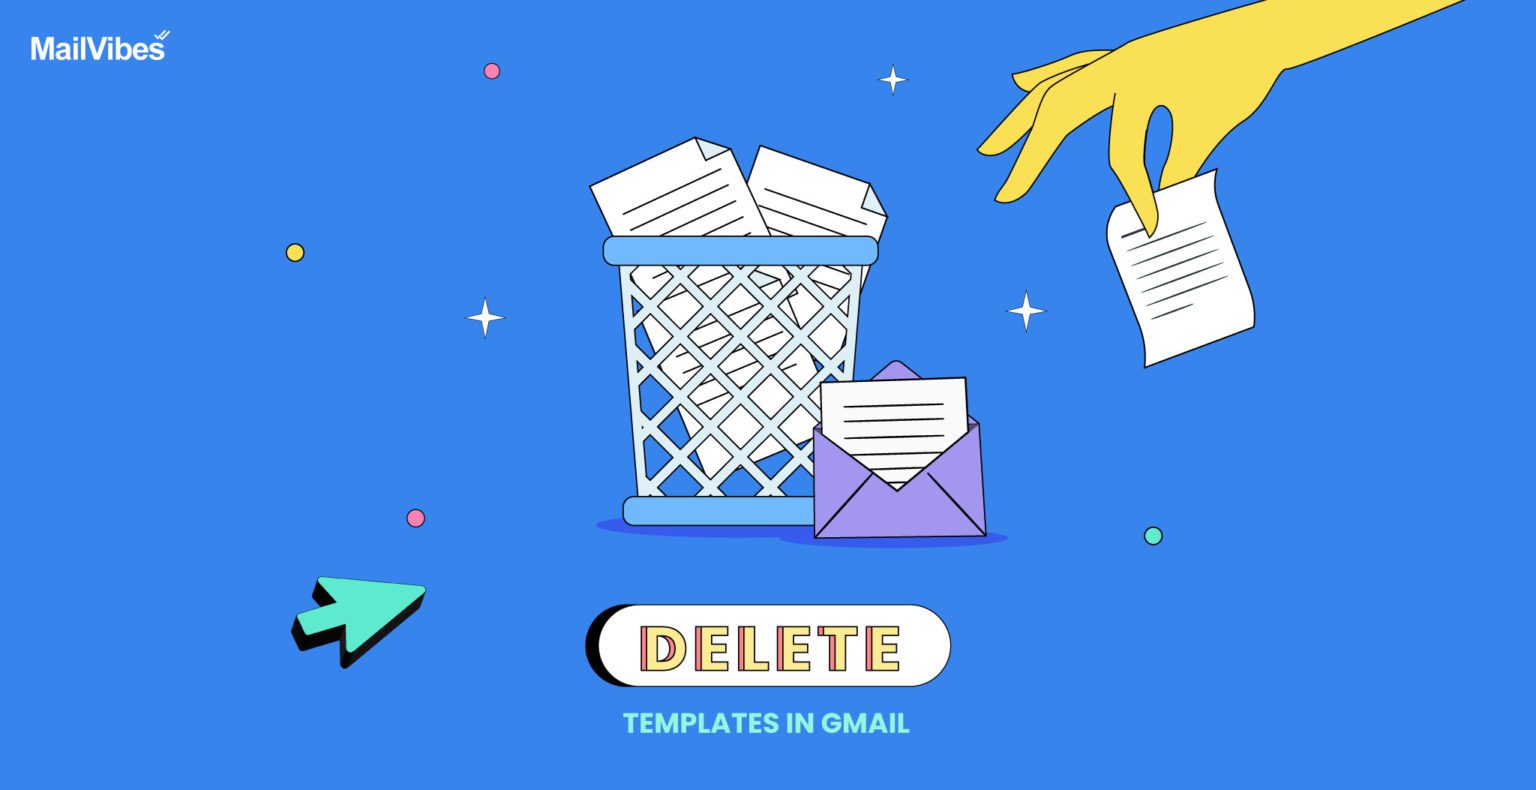 How to delete templates in Gmail (Dec 2023 update) MailVibes